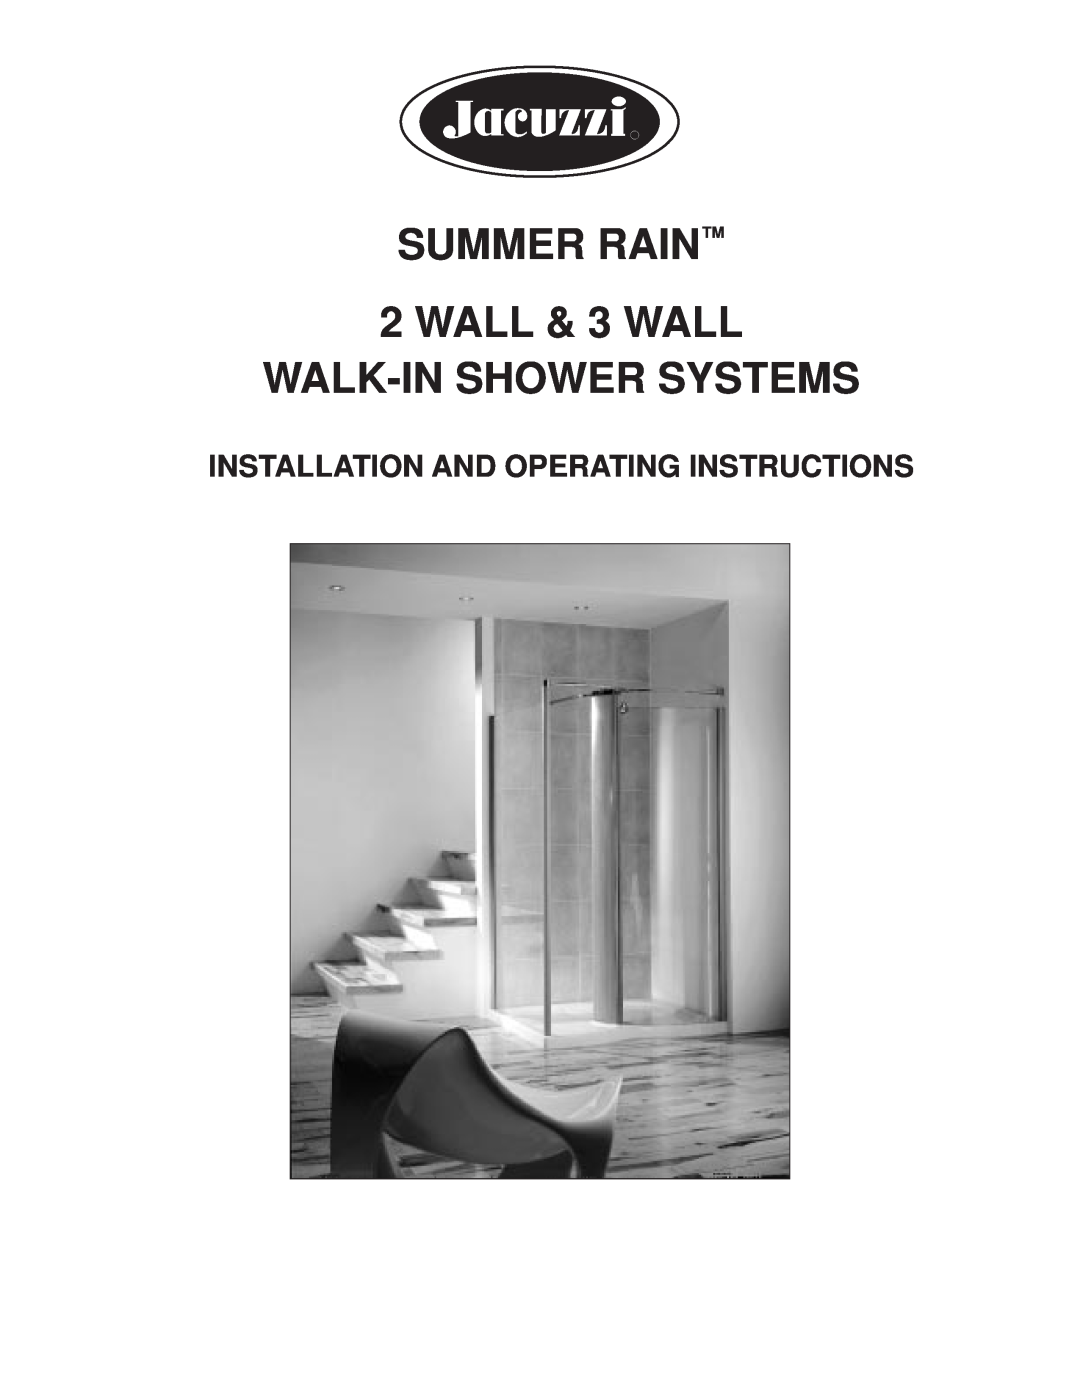 Jacuzzi 2 Wall and 3 Wall manual SUMMER RAIN 2 WALL & 3 WALL WALK-IN SHOWER SYSTEMS 